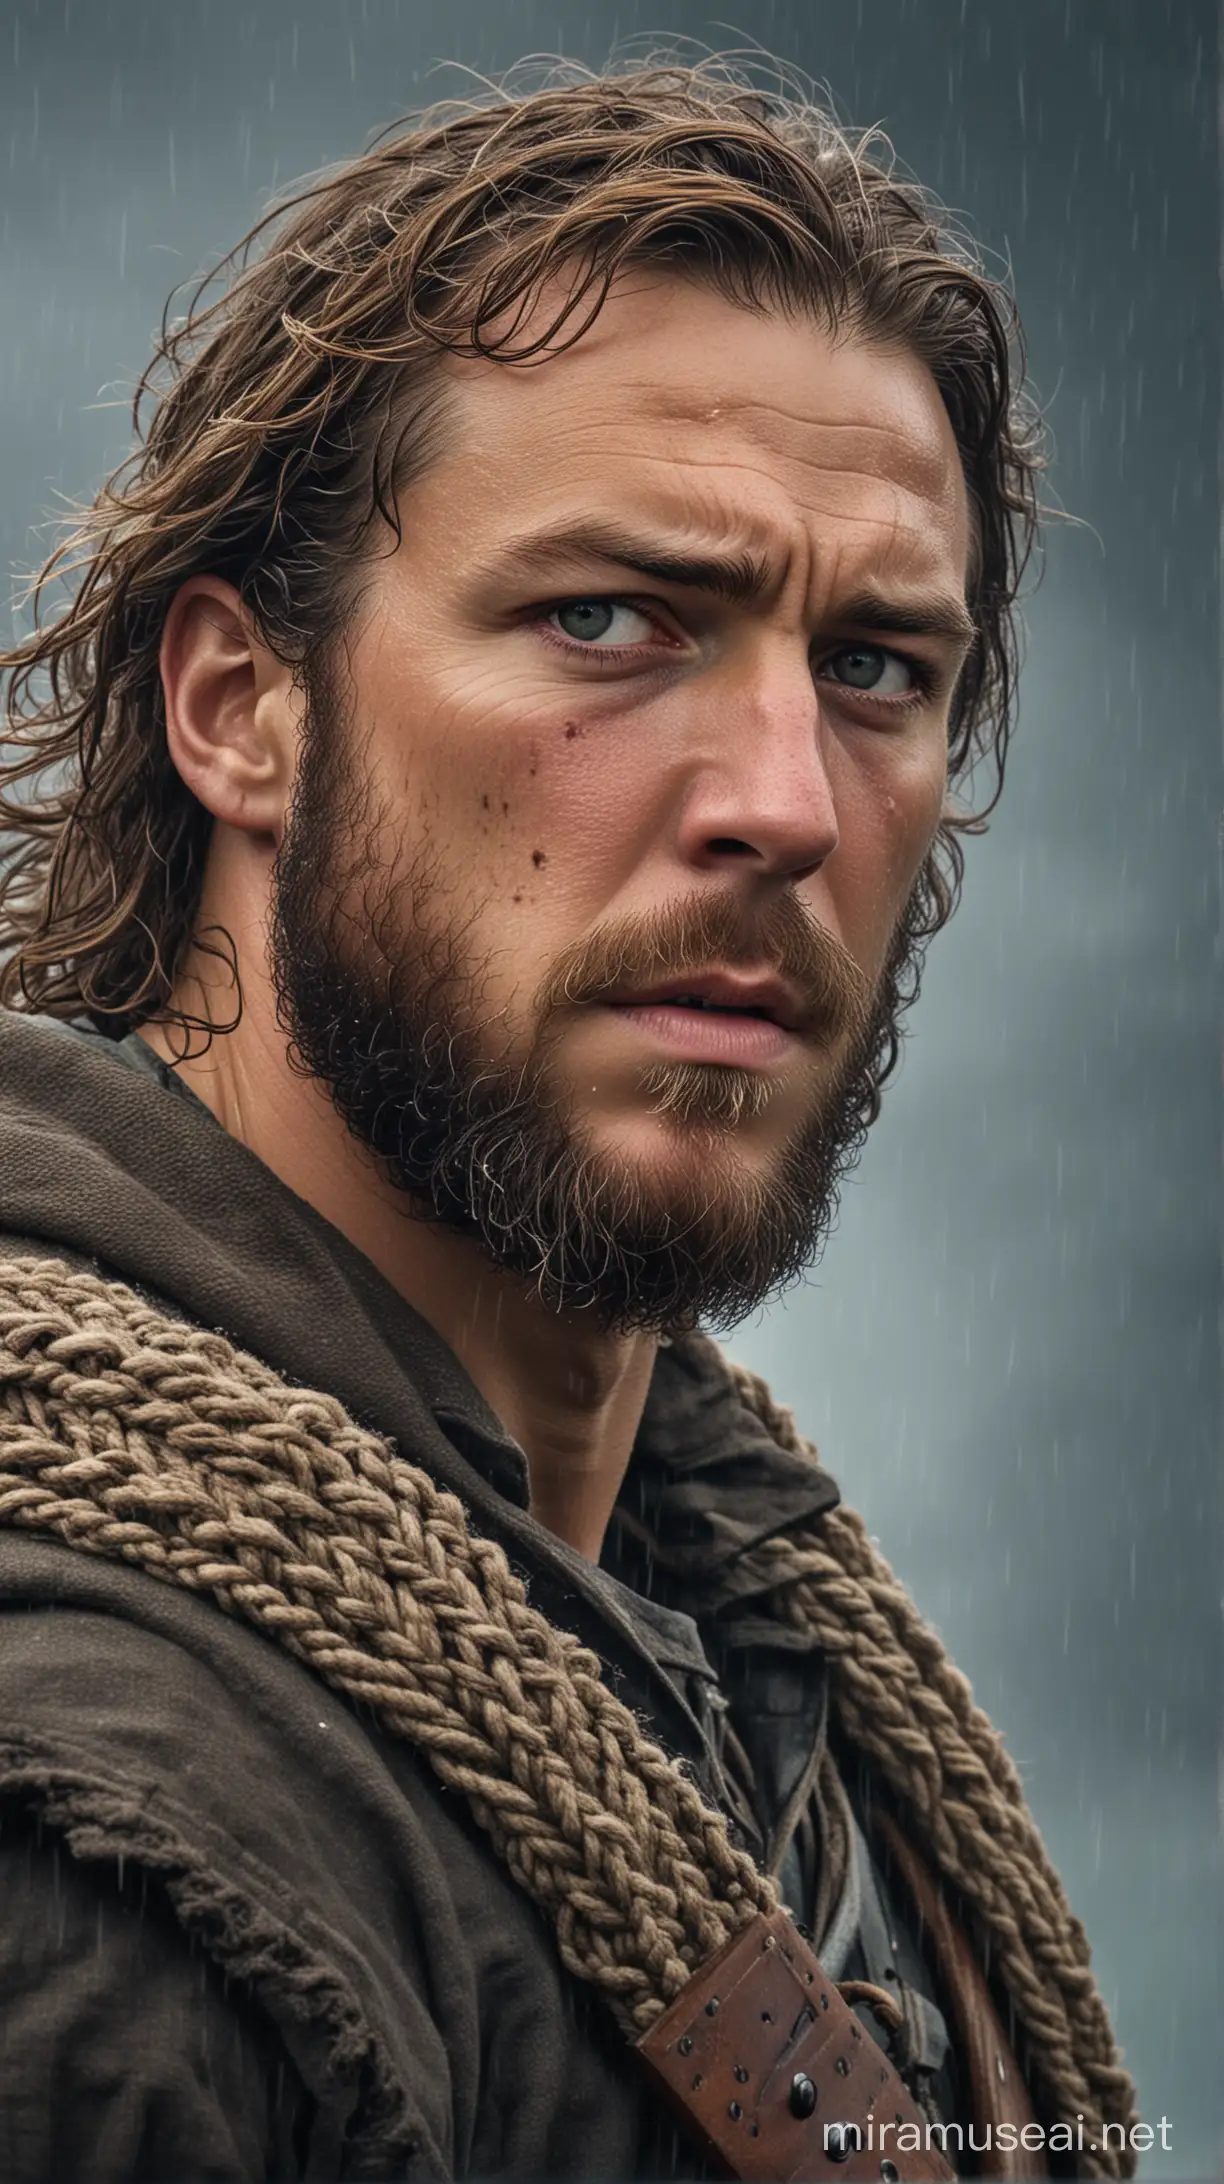 A close-up of Erik, the mighty warrior, standing tall on the deck of his ship, his face determined against the raging storm.
